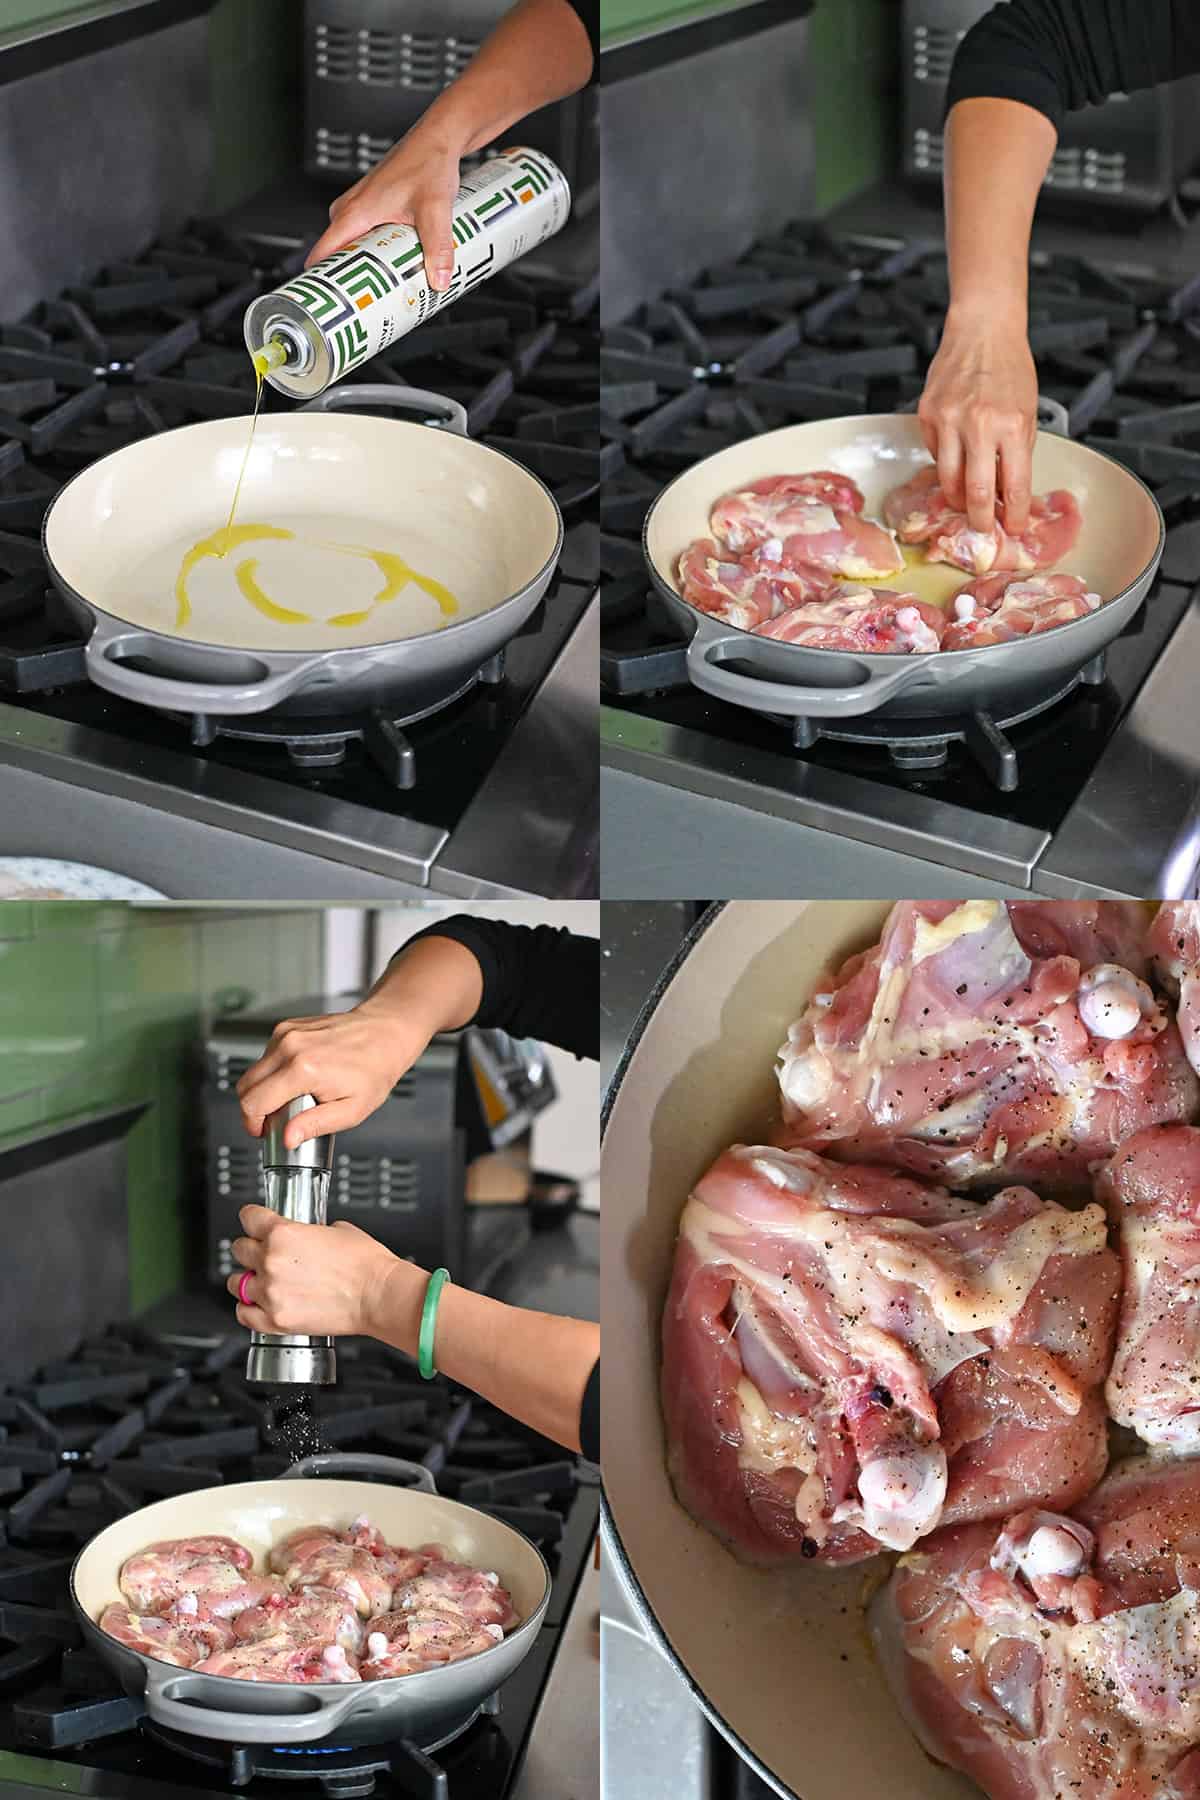 Four sequential shots that show someone adding olive oil to a enameled cast iron skillet, then adding raw chicken thighs skin side down in the pan, adding fresh pepper to the meat side, and a close up shot of the chicken.